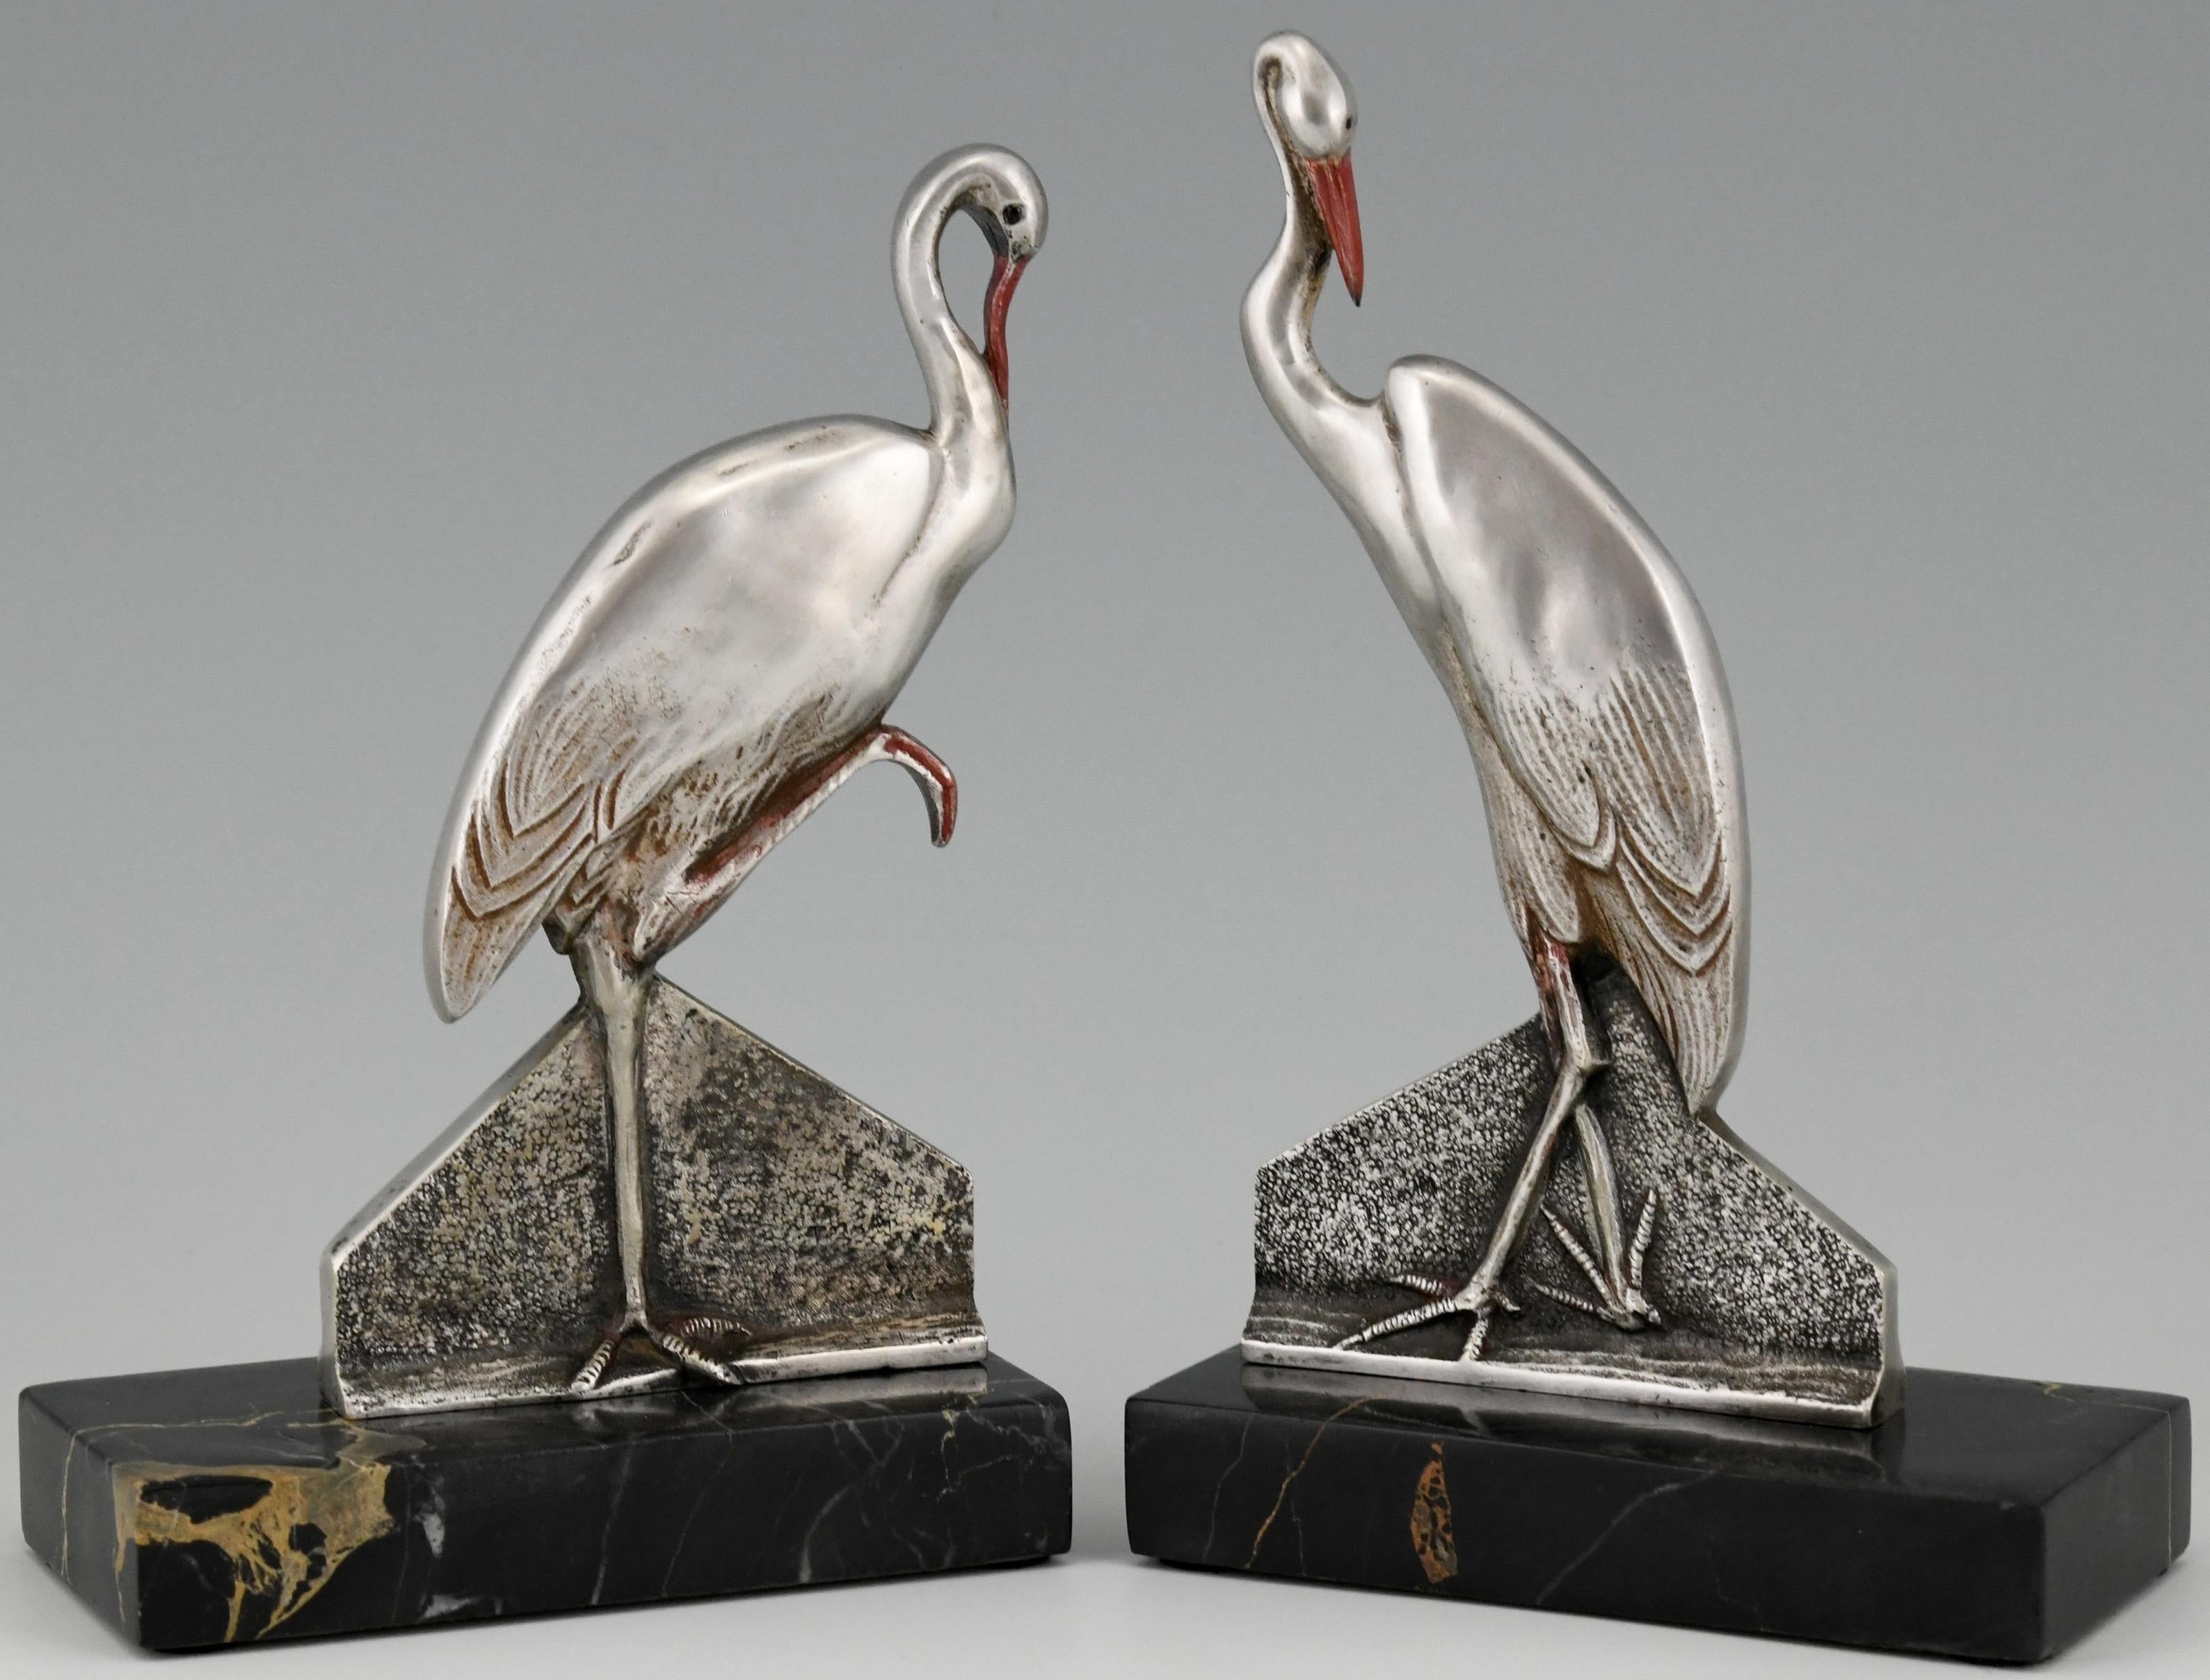 Lovely pair of Art Deco bronze bookends with a couple of stork birds.
Signed by F. H. Danvin, France, 1930. The bronze birds have a silver and red patina and are mounted on Portor marble bases.
Literature:
“Dictionnaire illustré des sculpteurs